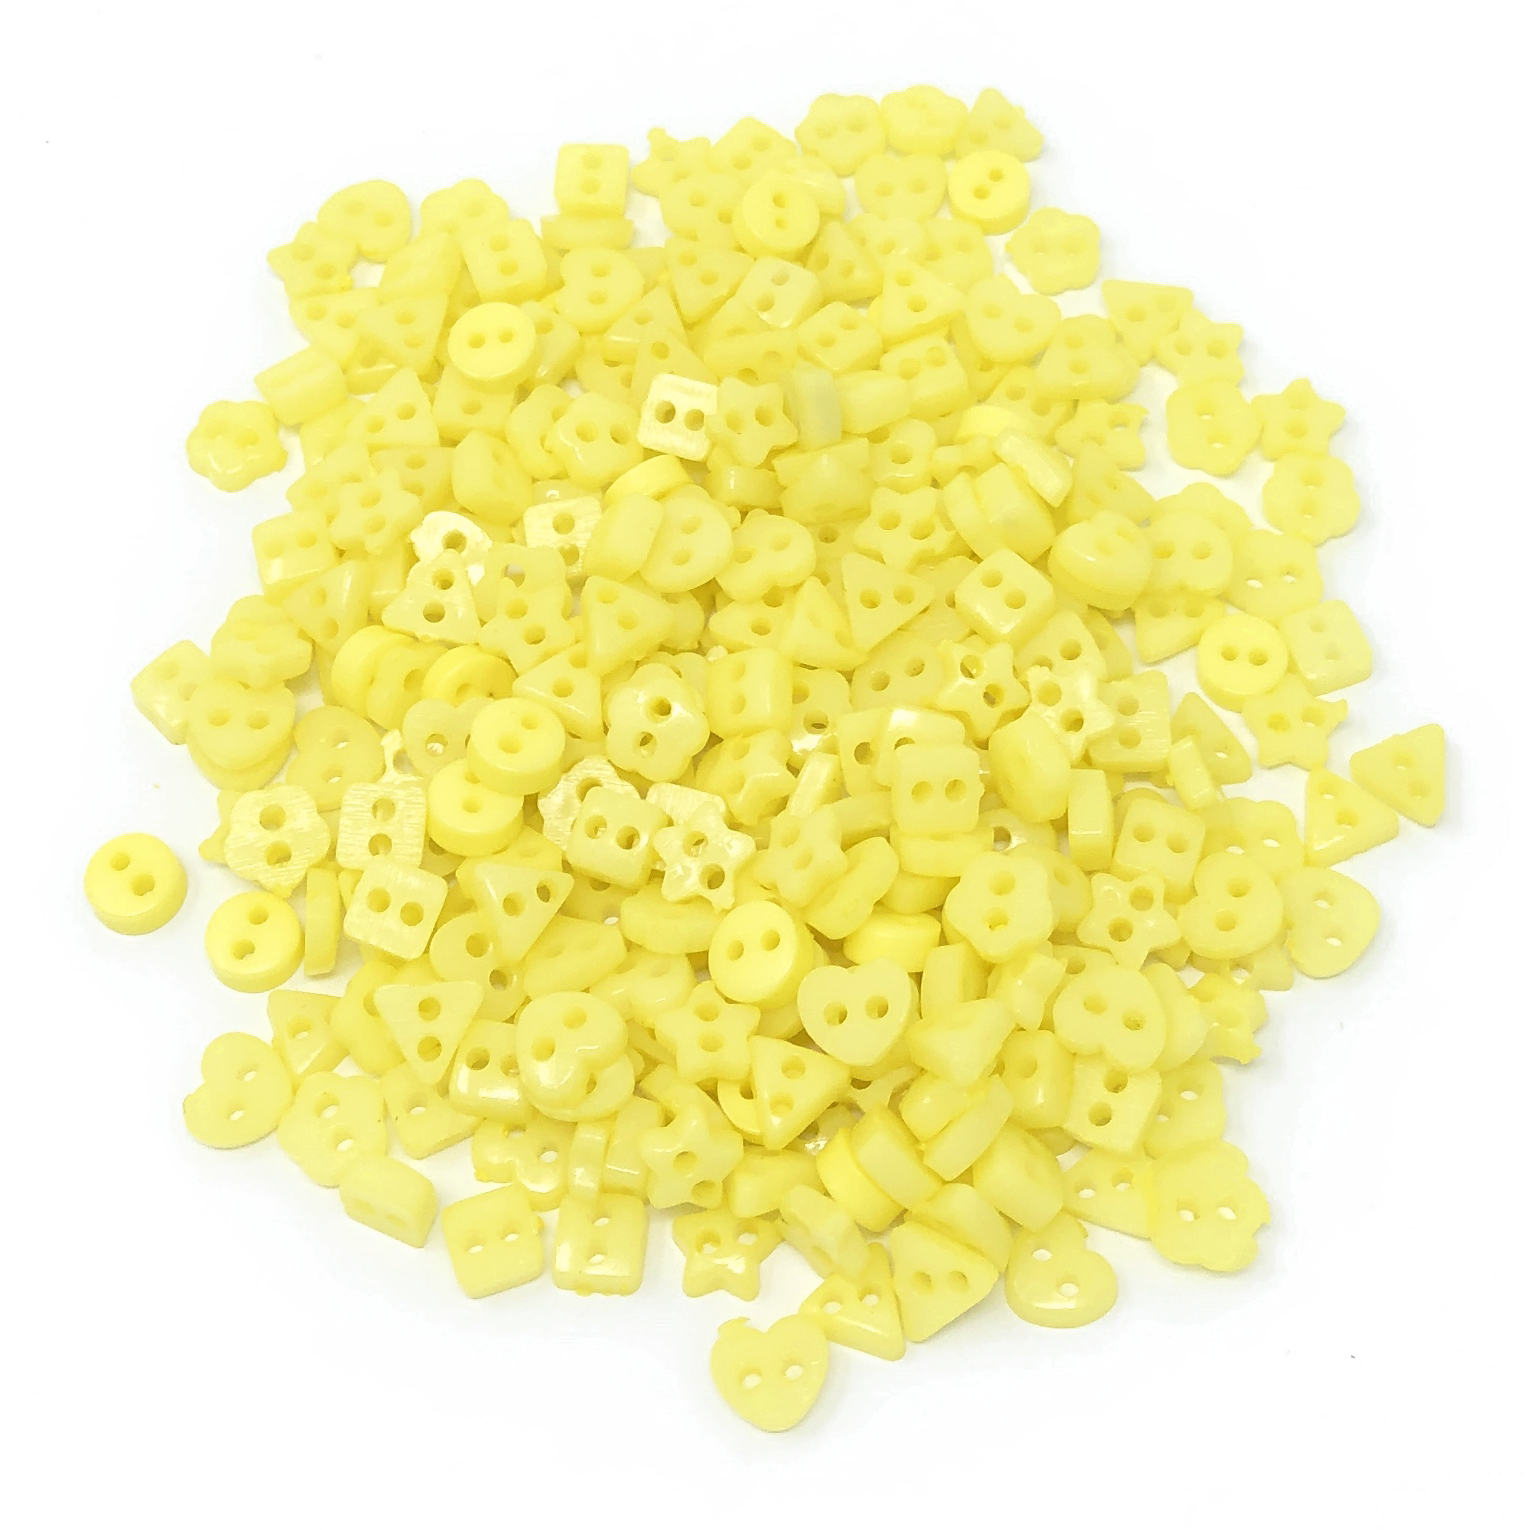 Yellow 6mm Mixed Shape Multicoloured Resin Buttons - Pack of 300